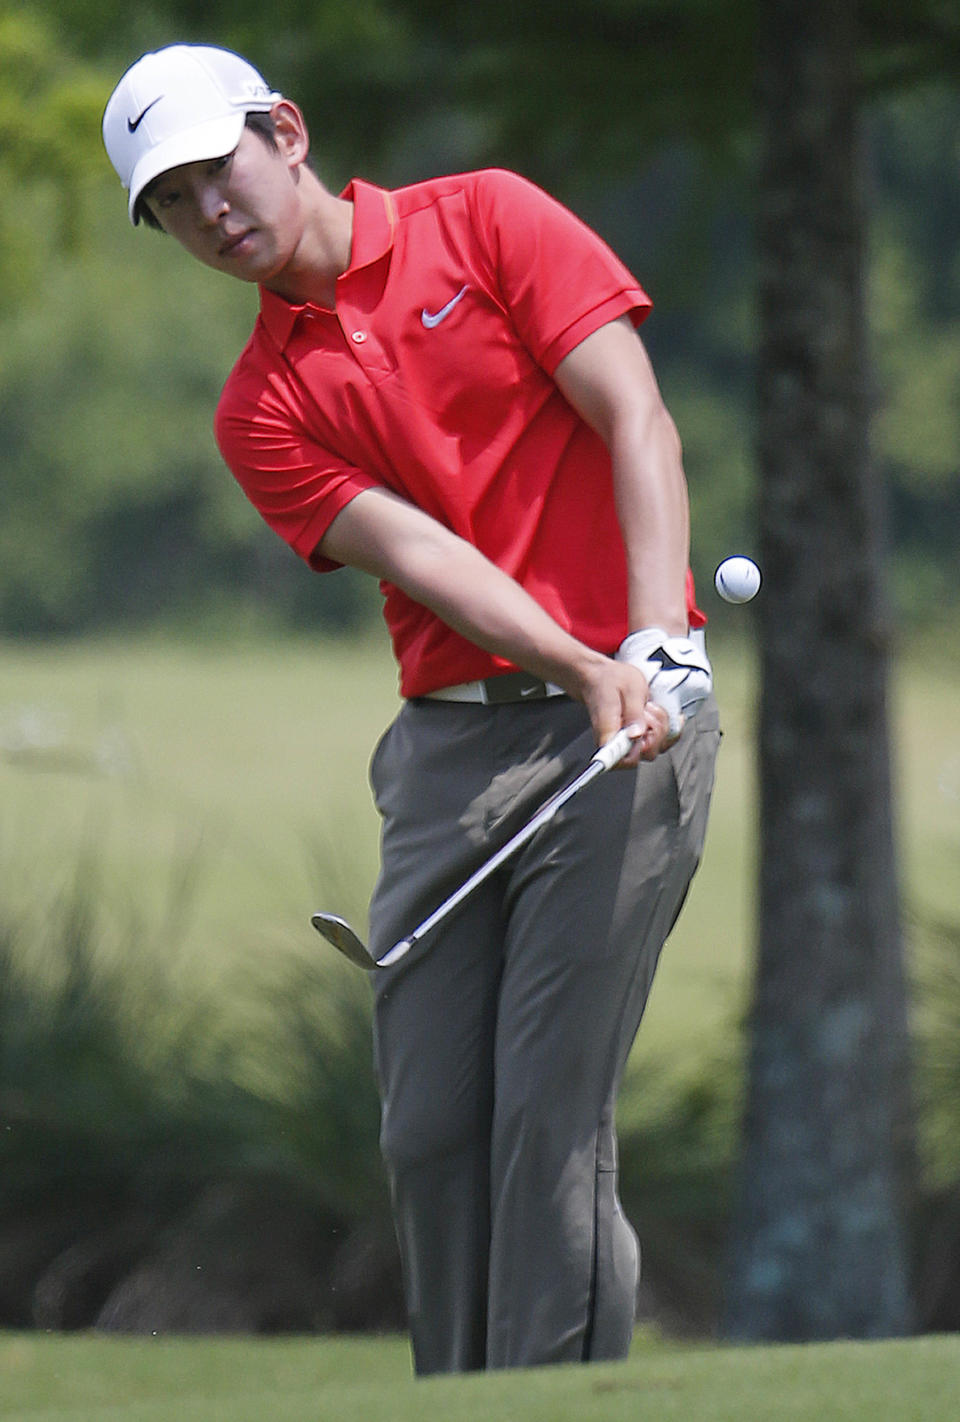 Noh Seung-Yul, of South Korea, chips onto the first green during the final round of the Zurich Classic golf tournament at TPC Louisiana in Avondale, La., Sunday, April 27, 2014. (AP Photo/Bill Haber)